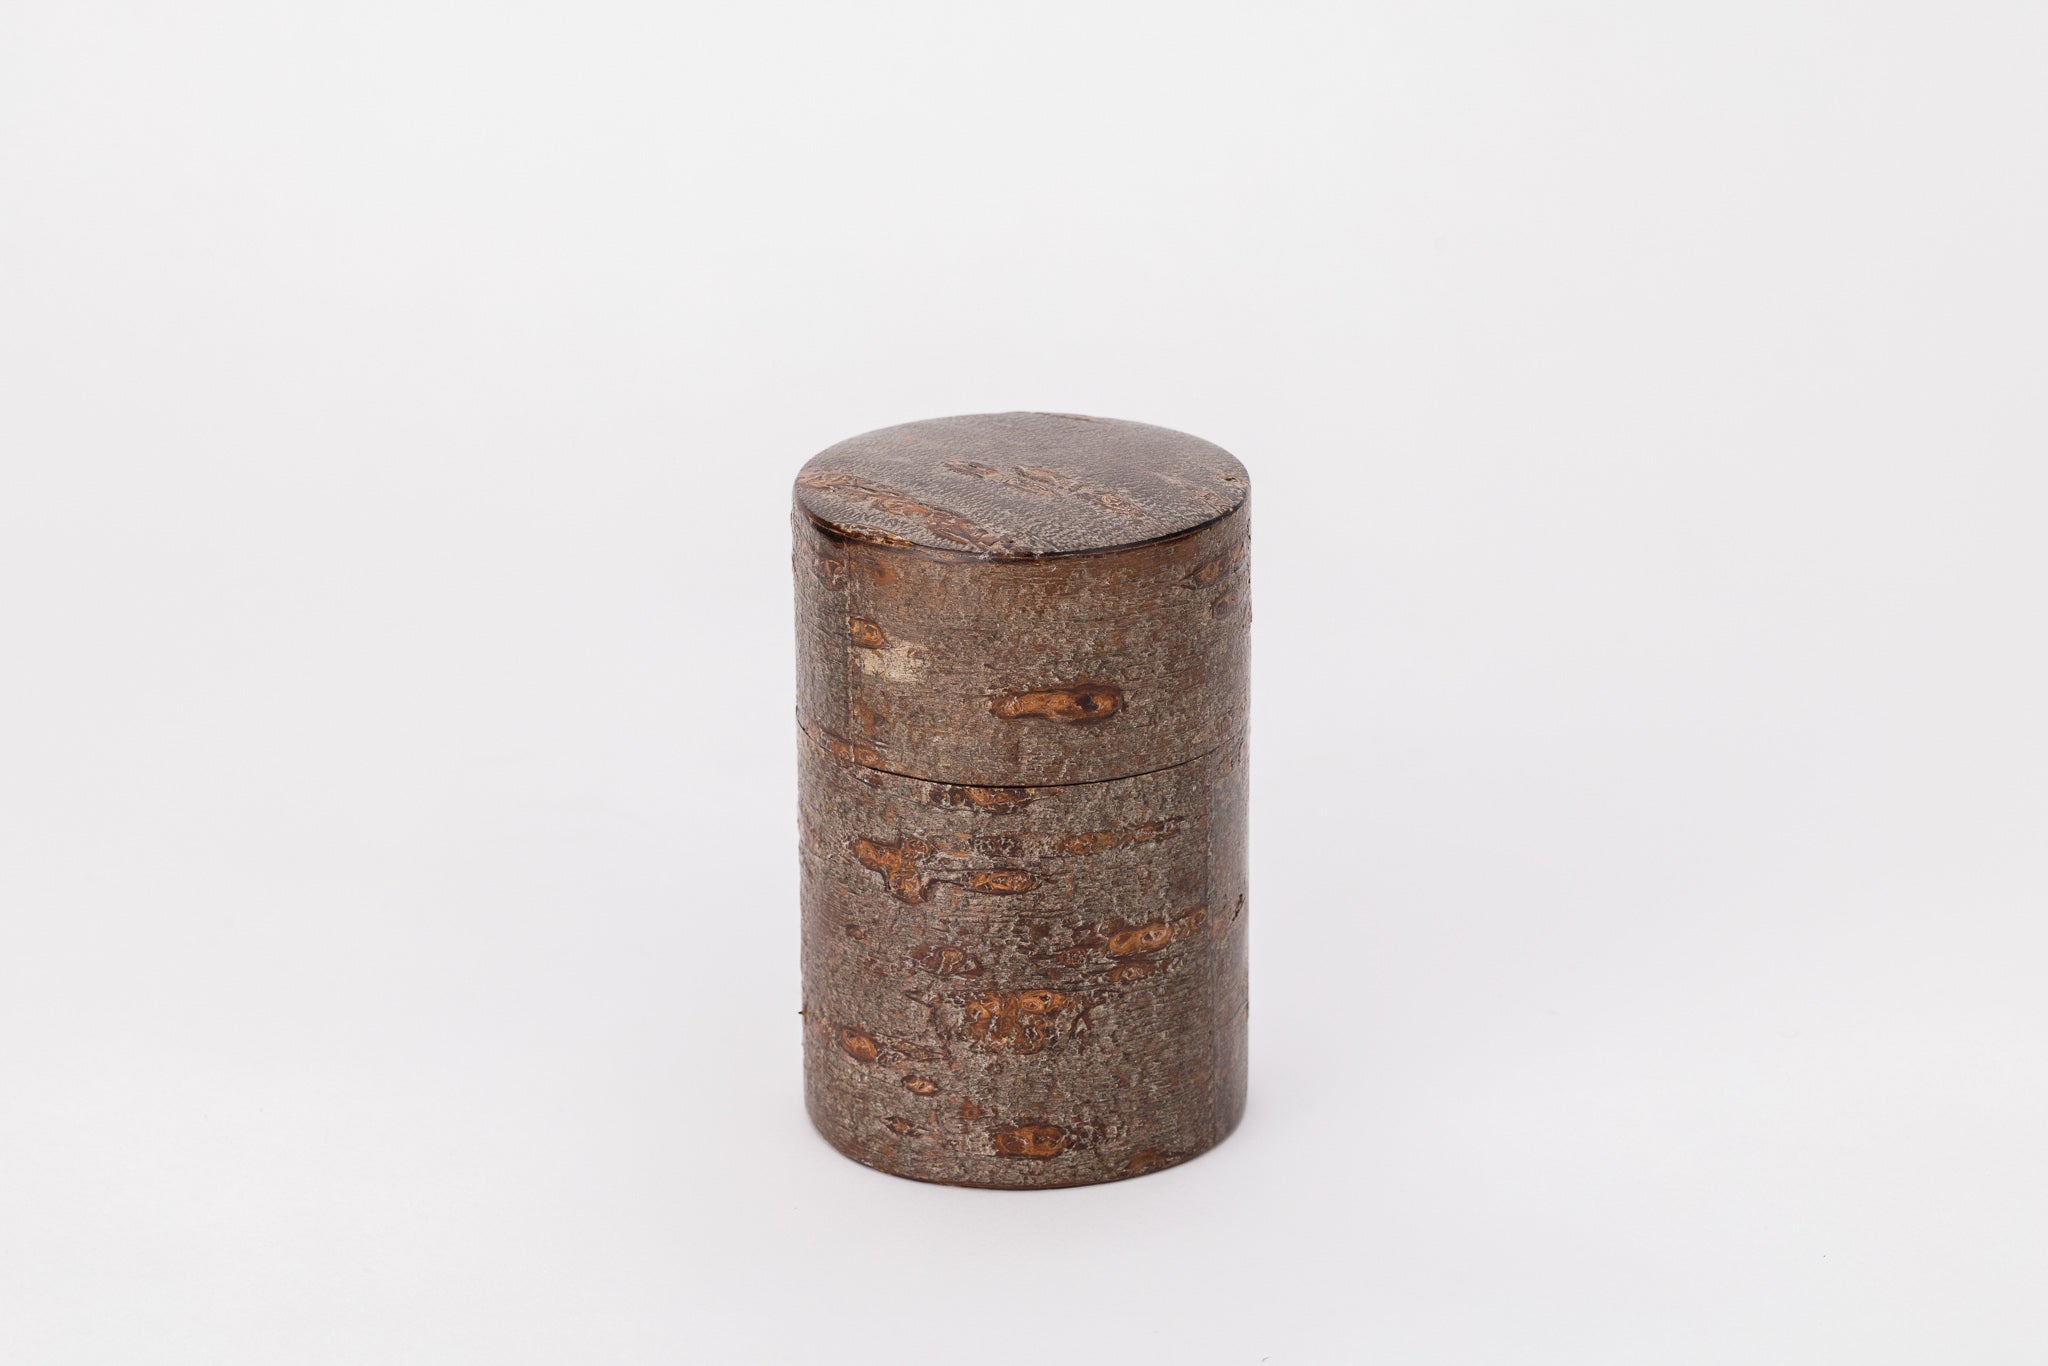 A cylindrical tea caddy made of cherry bark sits on a white background with its lid closed. The cherry bark is brown and rough like the bark of a tree.